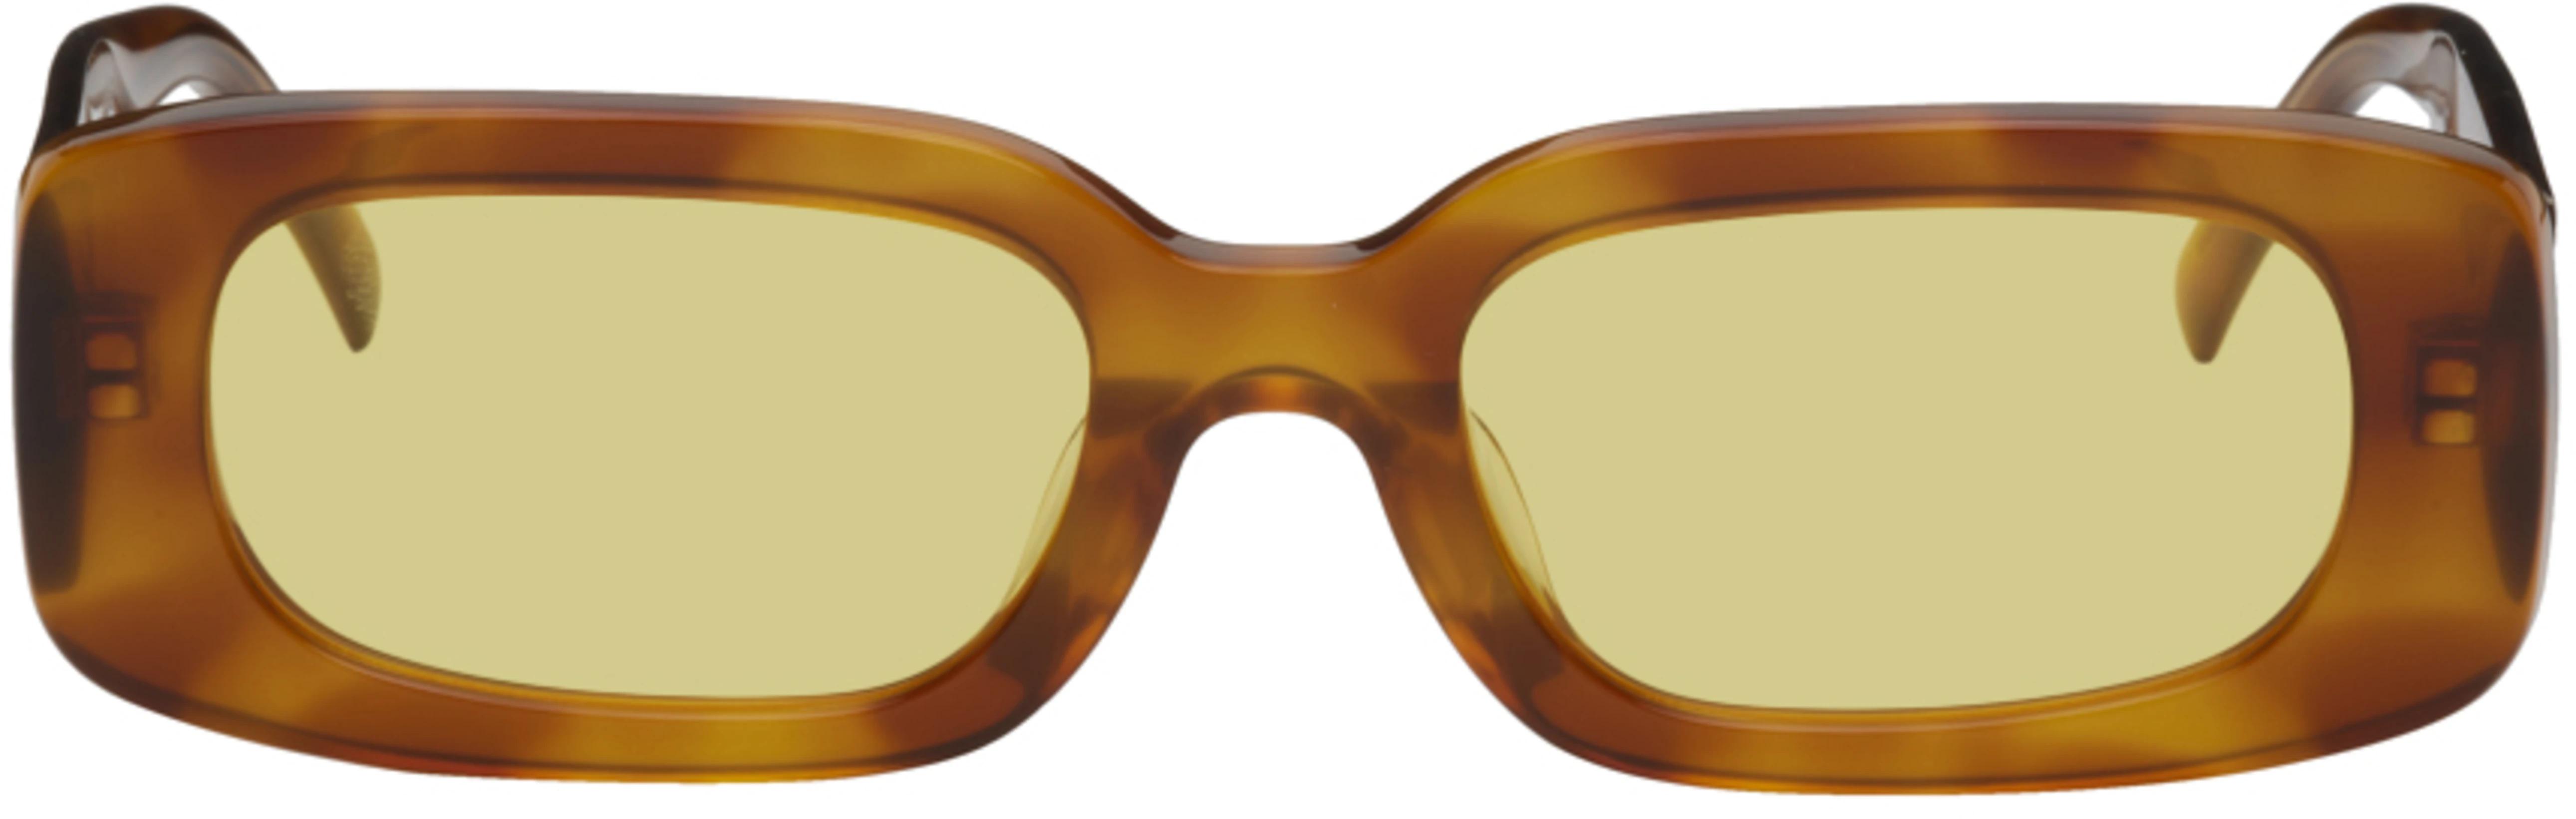 Tortoiseshell Show And Tell Sunglasses by BONNIE CLYDE